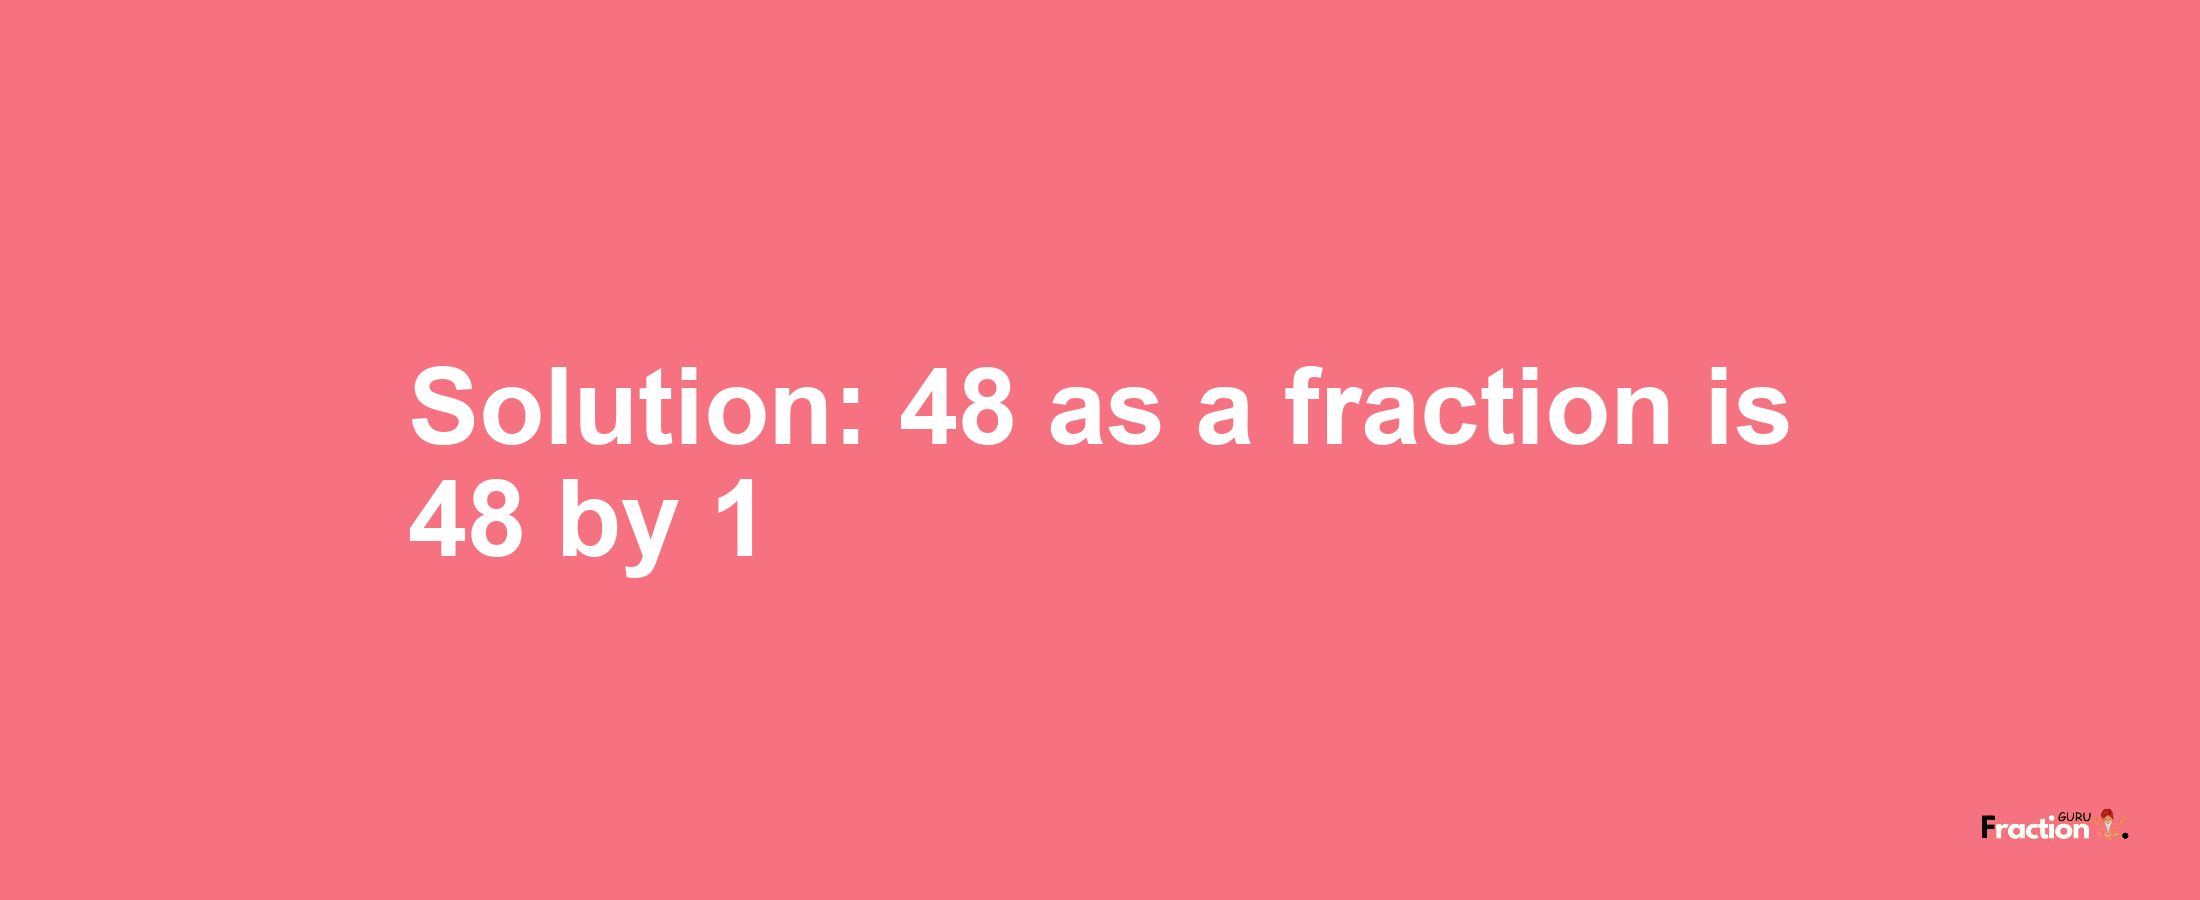 Solution:48 as a fraction is 48/1